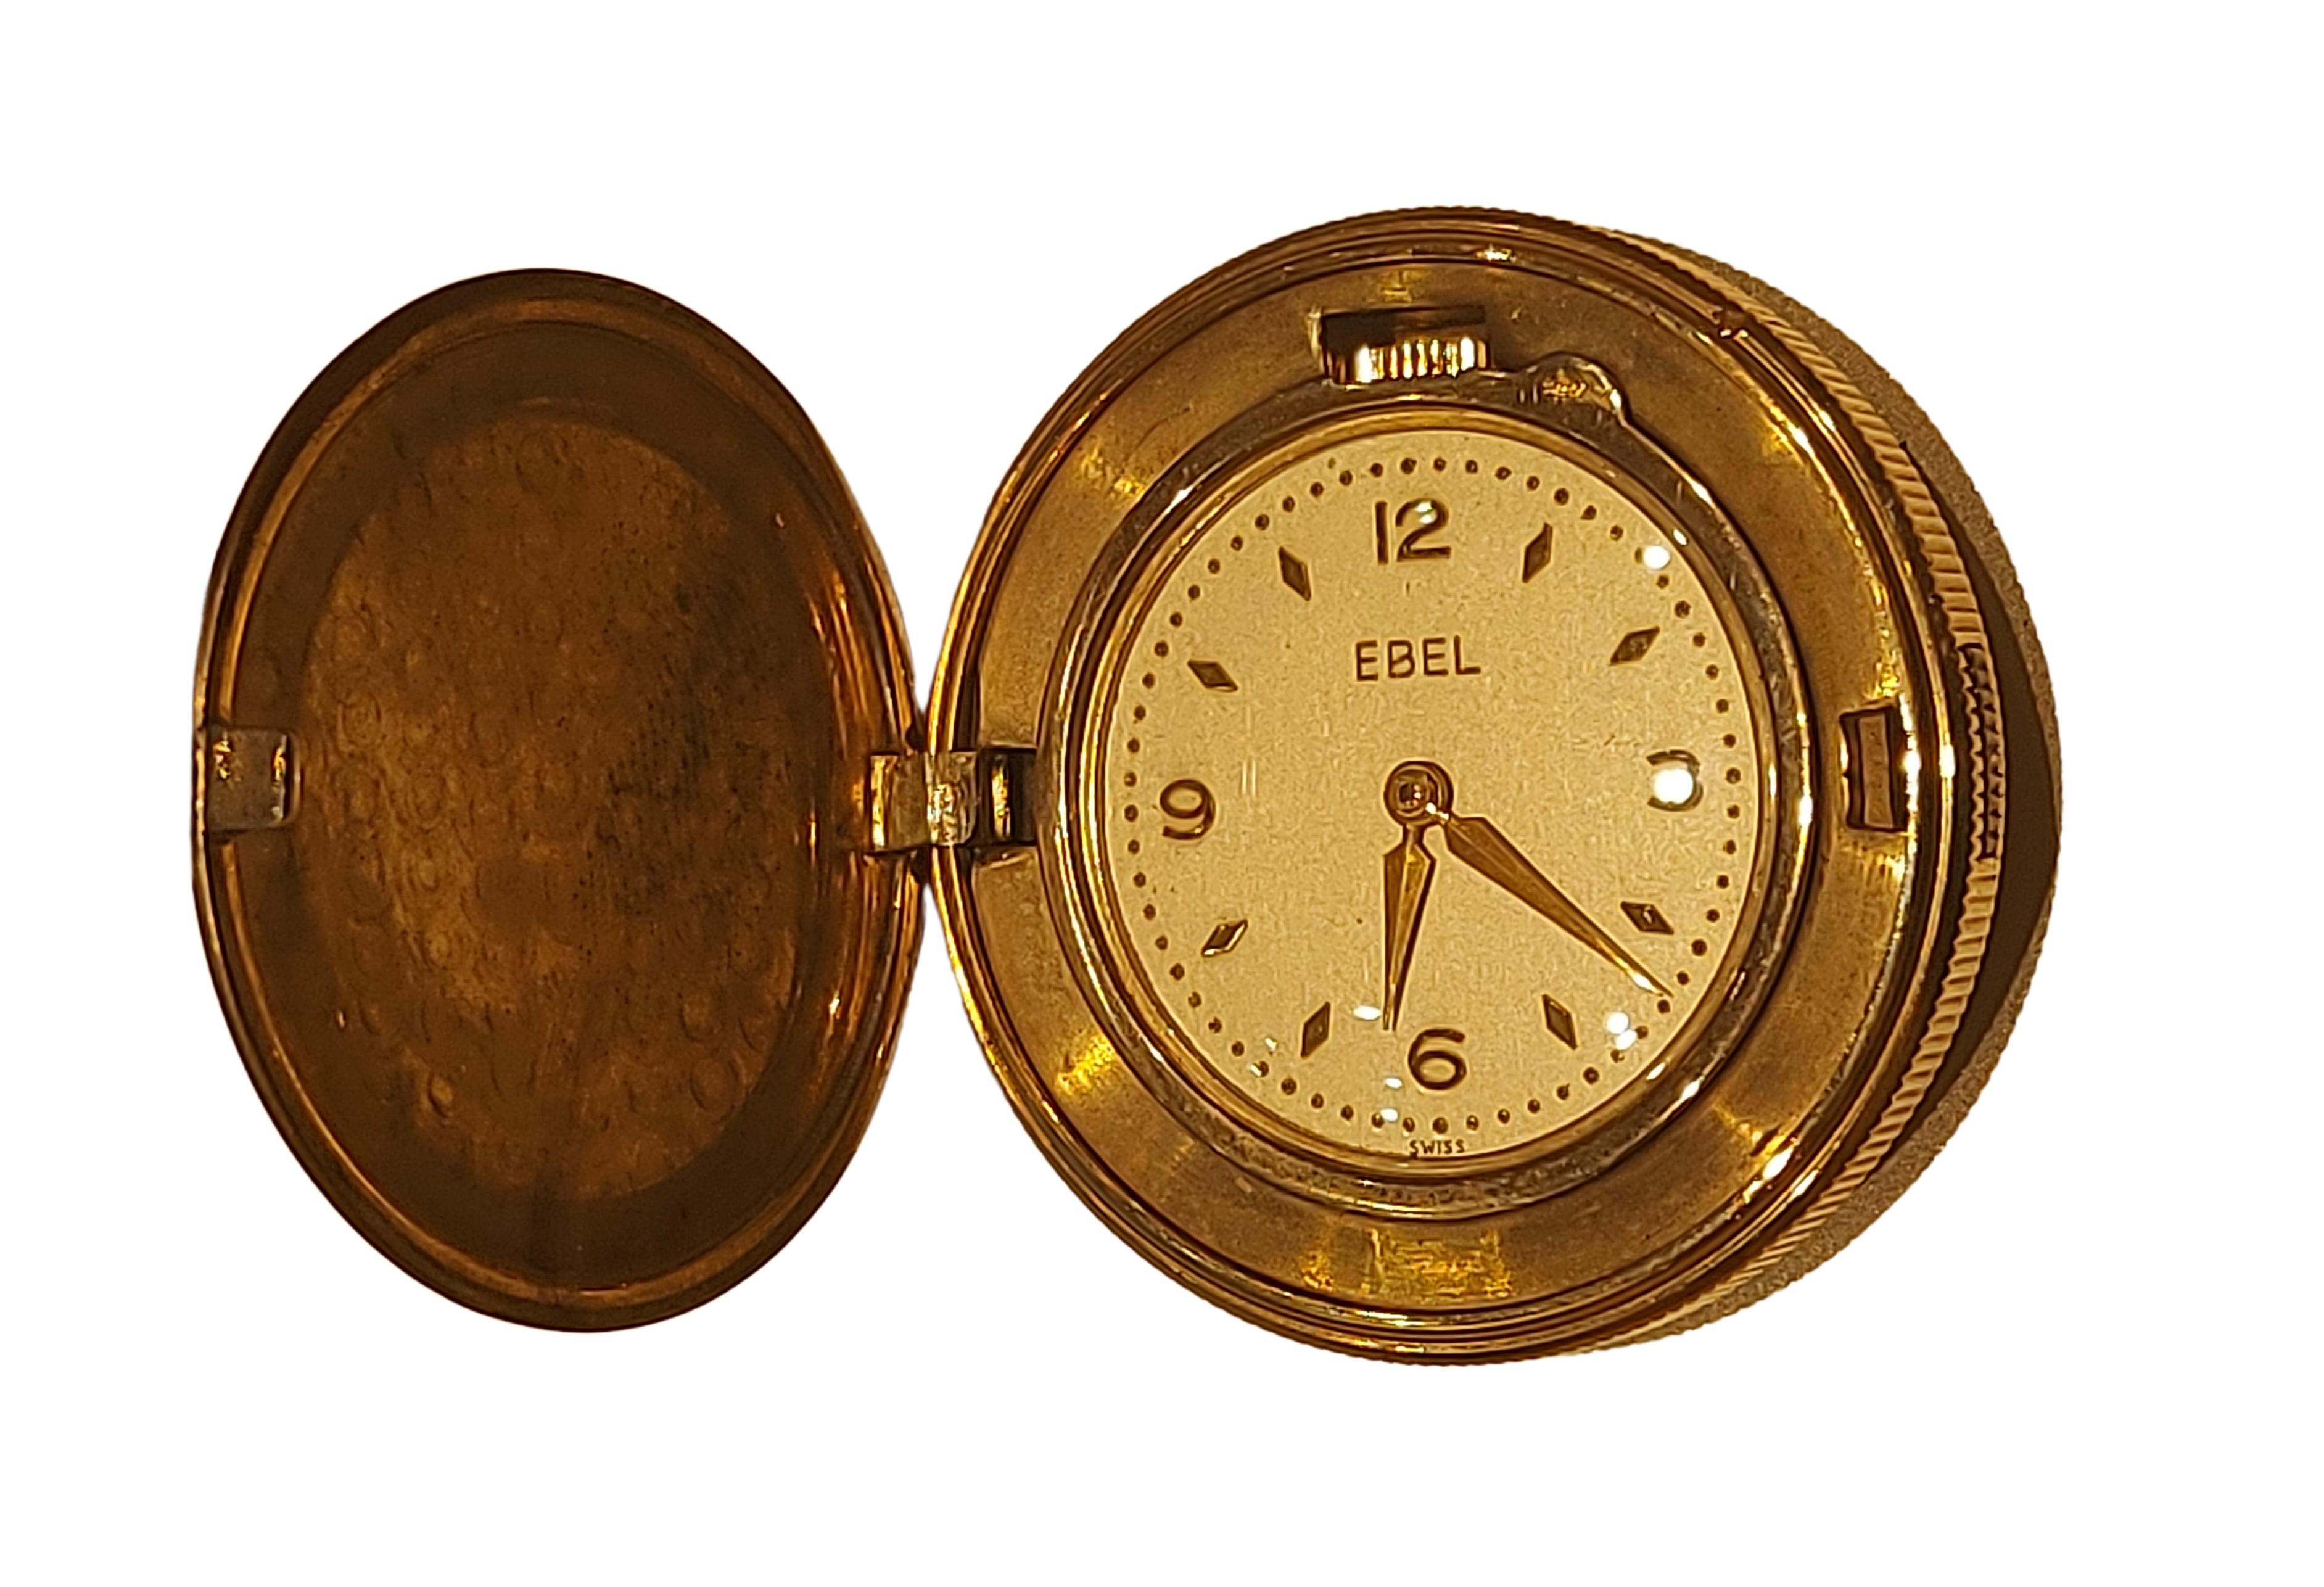 Rare Vintage Ebel Gold Plated Pocket watch 

Material: Gold Plated

Case: Diameter 36.4 mm x Thickness 9.5 mm, gold plated

Dial: Goldish dial with Gold markers and Arabic Numerals. Diameter dial 26.6 x thickness 6.4 mm

Total weight:42.7 gram /